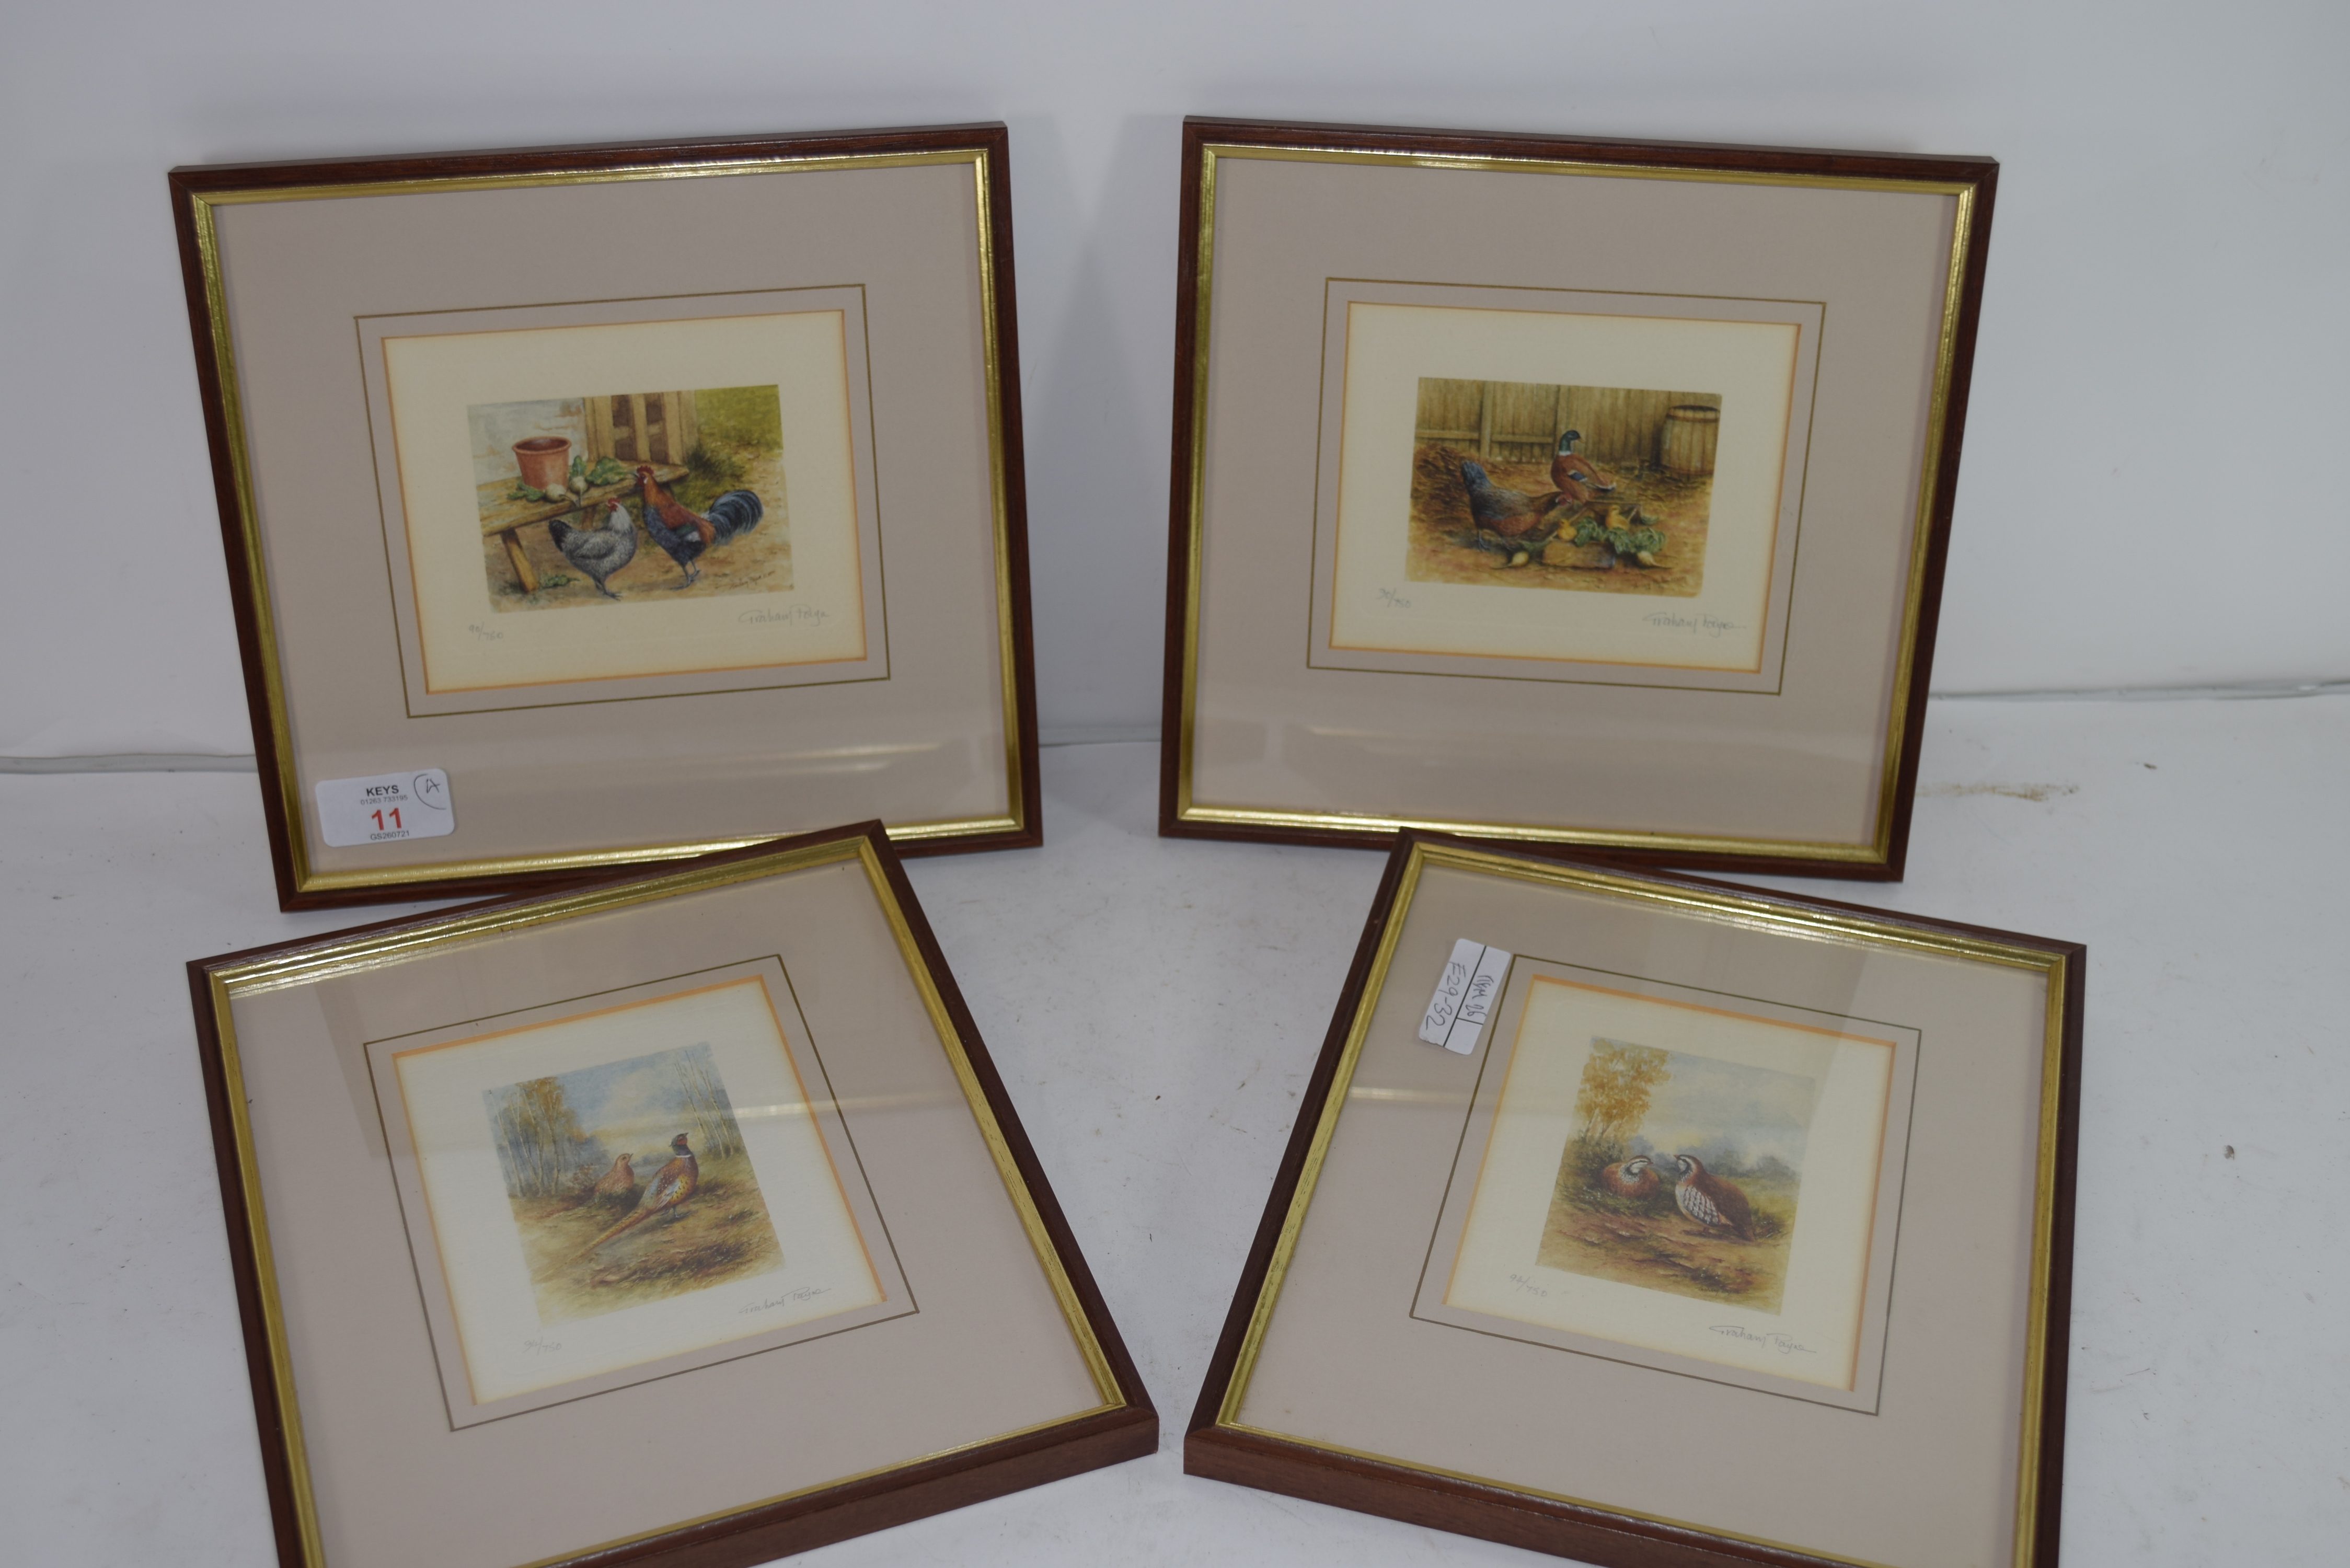 GRAHAM PAYNE, GROUP OF FOUR COLOURED LIMITED EDITION PRINTS, GAME BIRDS AND POULTRY